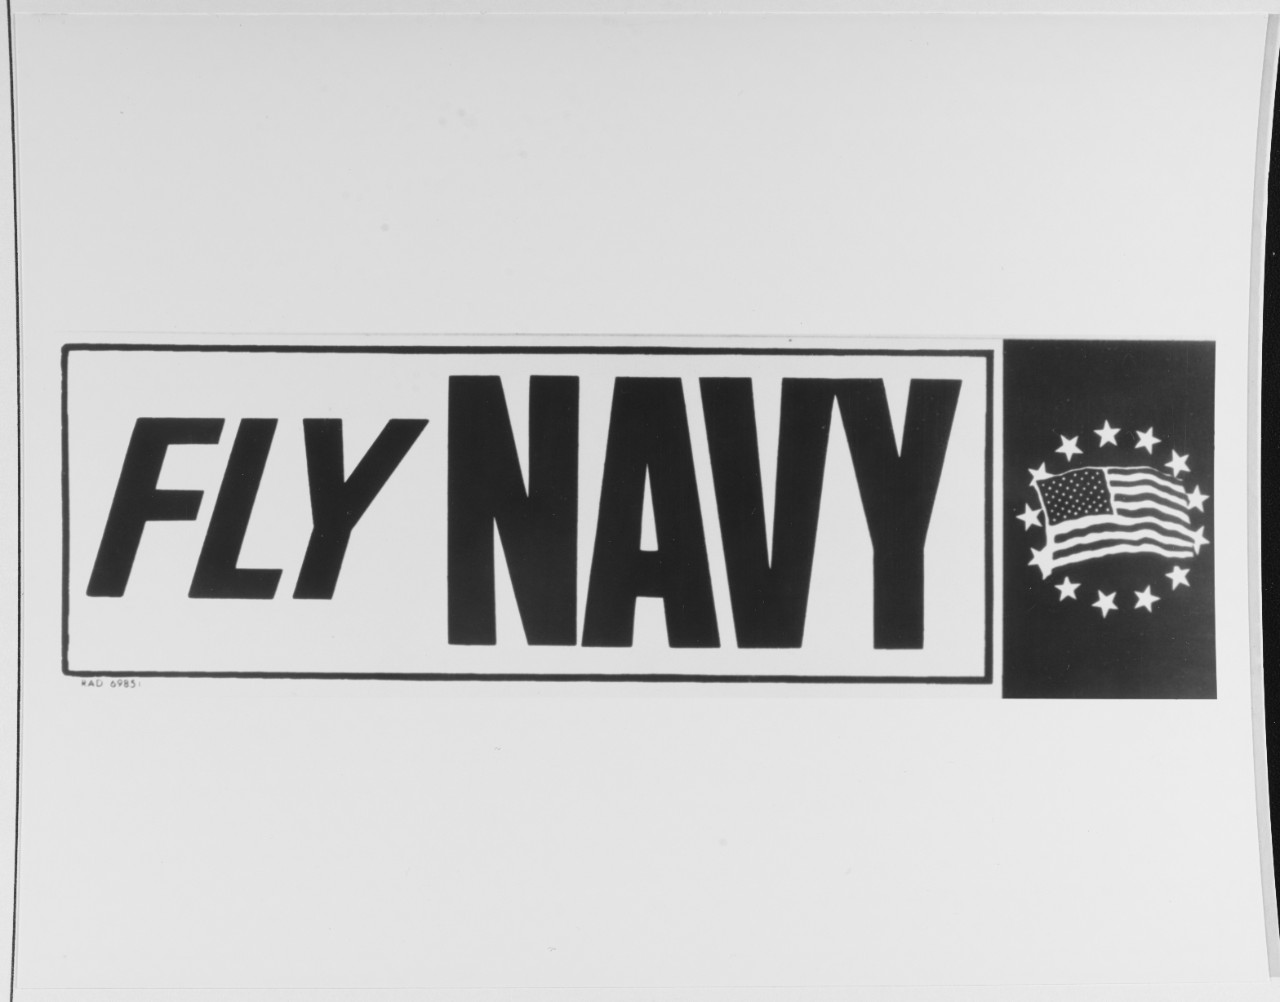 Recruiting:  Fly Navy